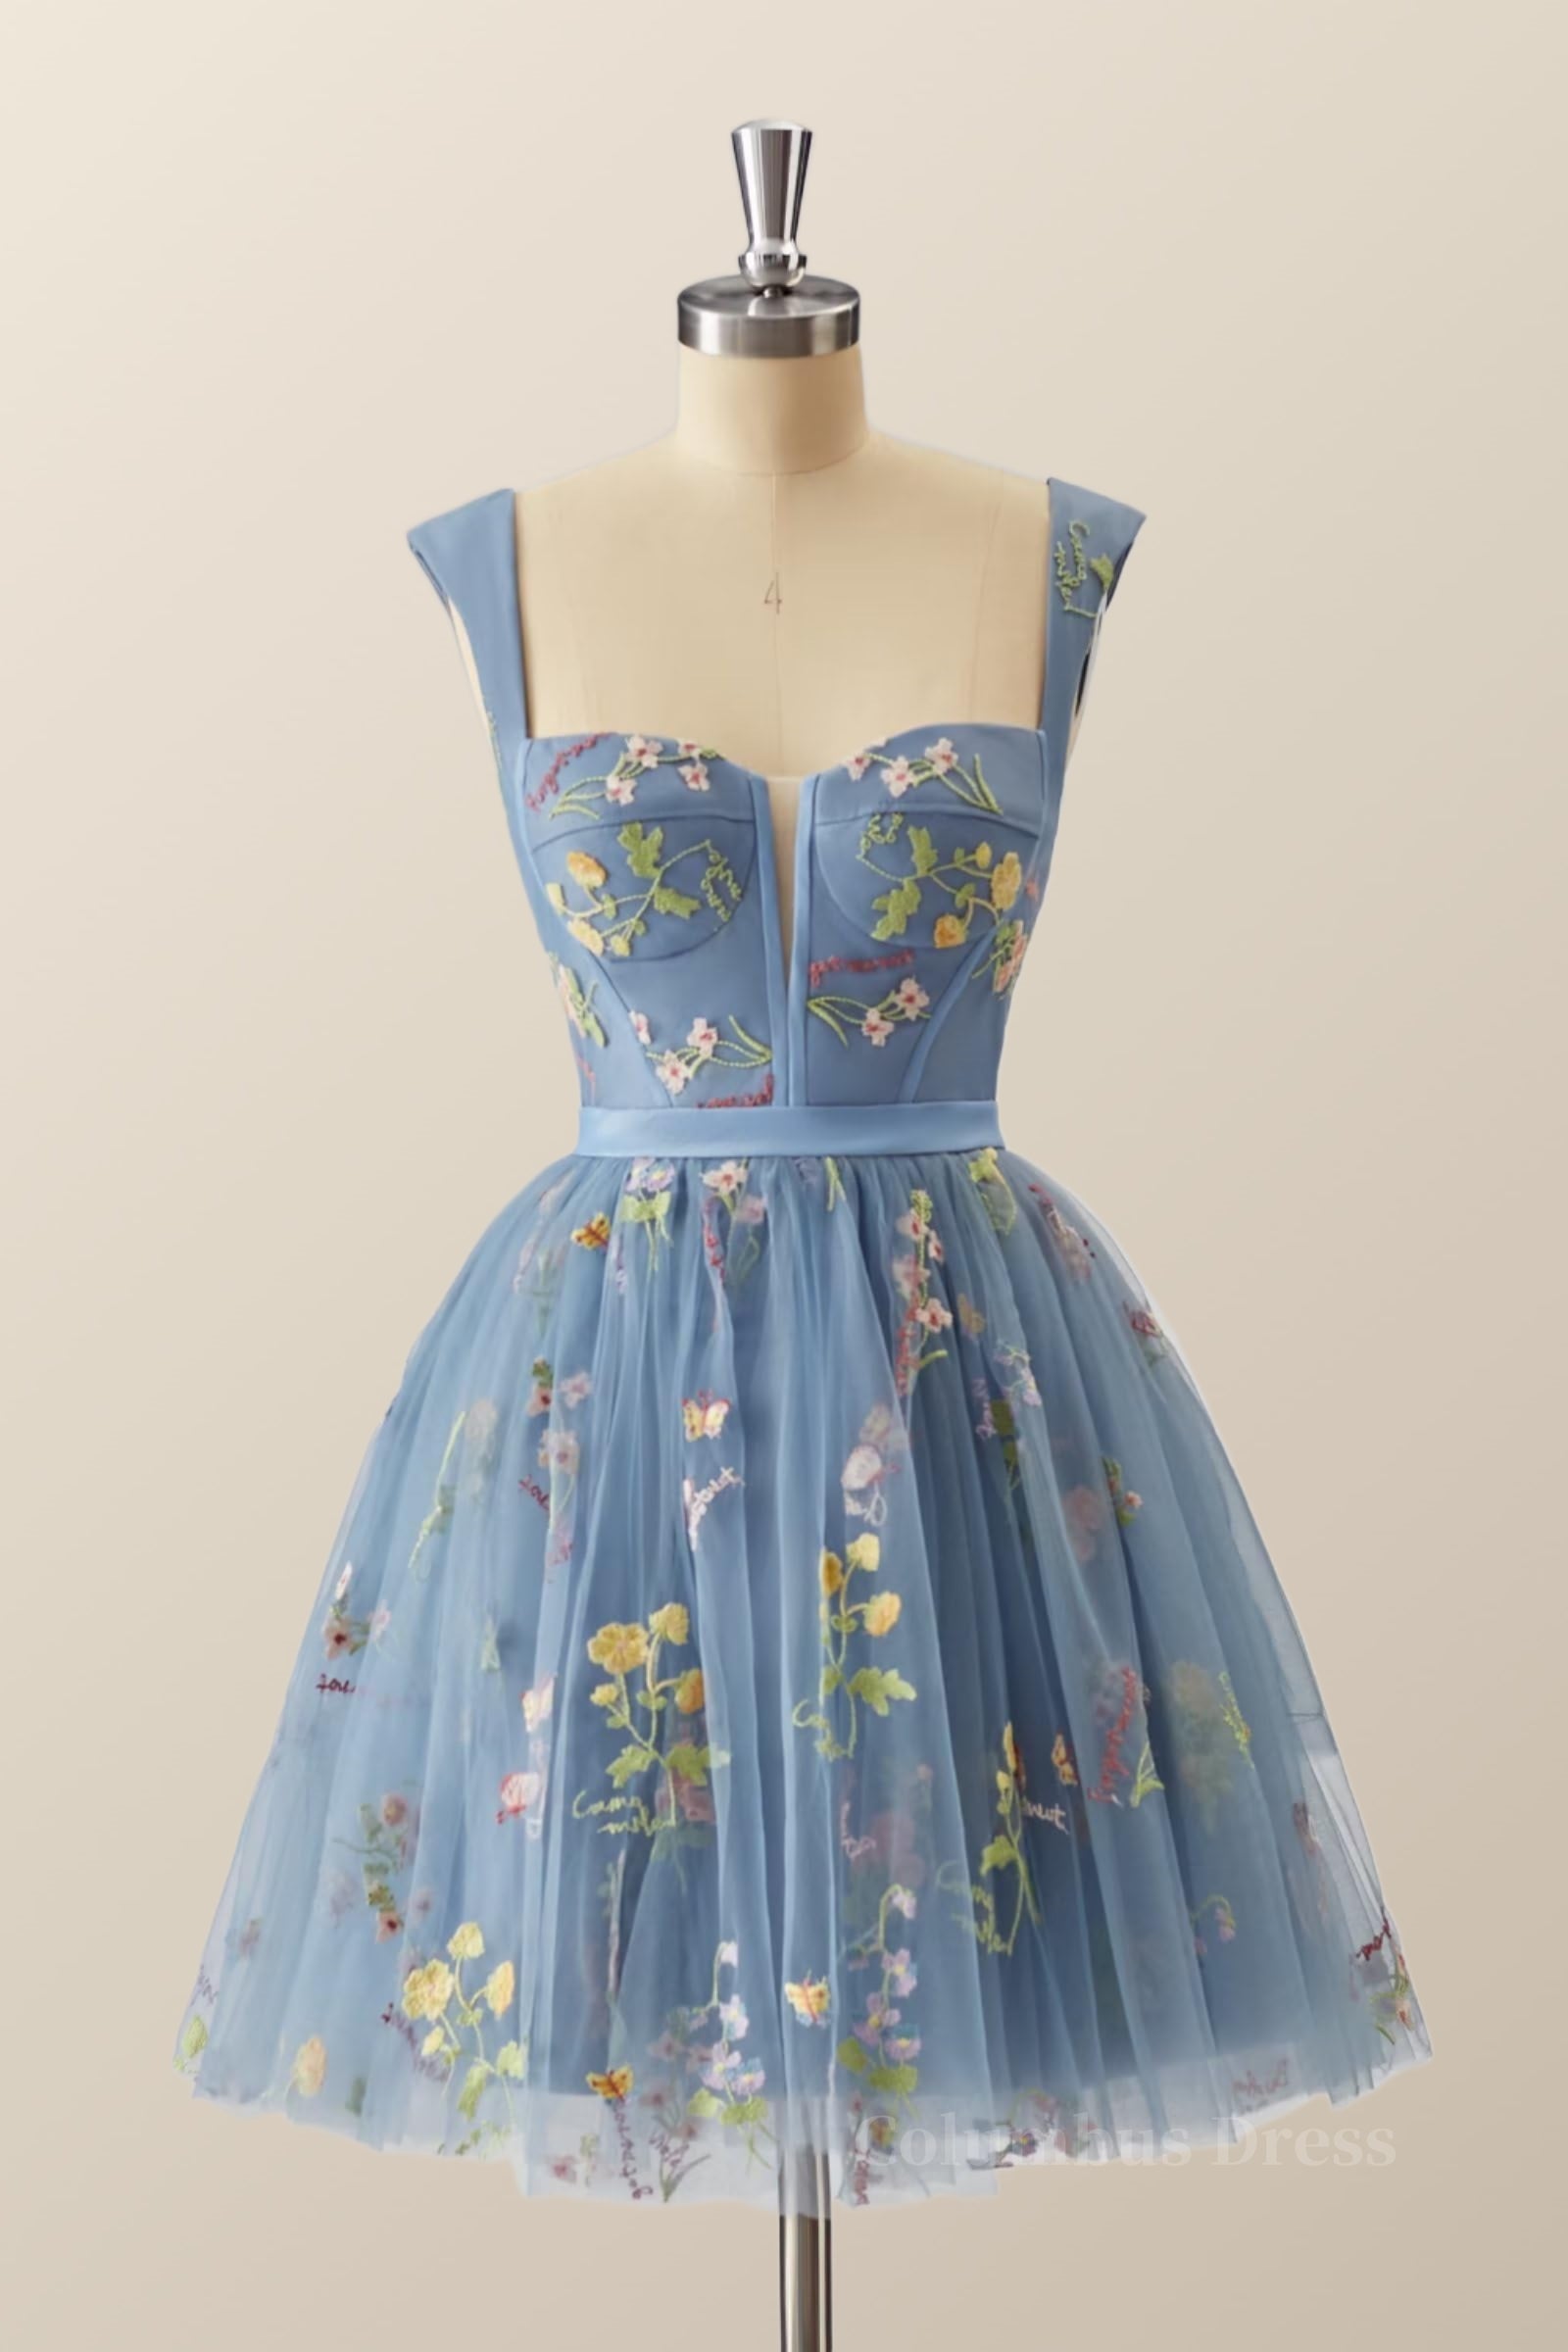 Prom Dress Styles, Cap Sleeves Blue Floral A-line Short Dress